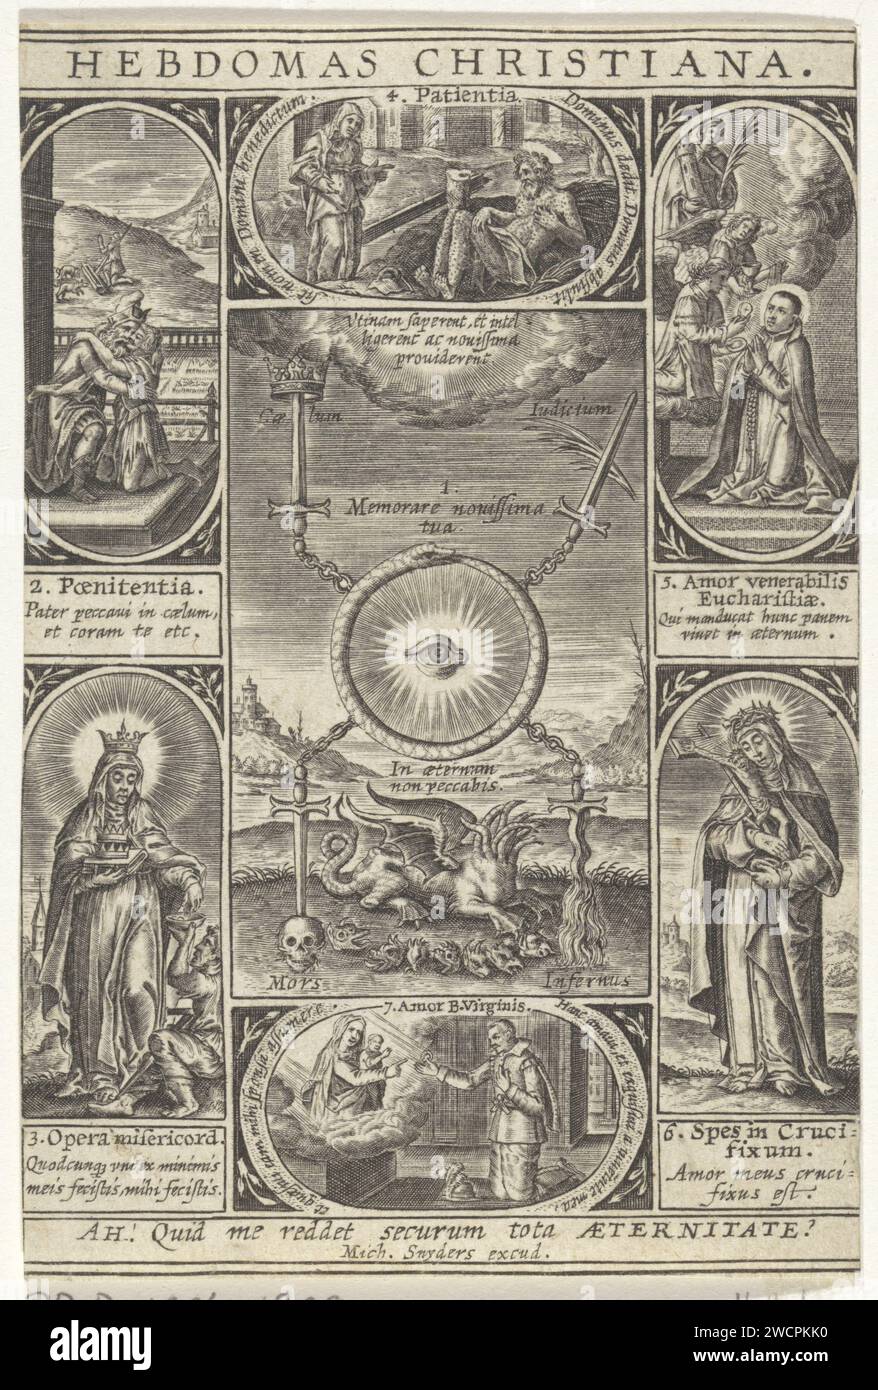 Hebdomas Christiana, Michael Snijders, 1610 - 1672 print Seven small allegorical representations of the Christian virtues, grouped around the eye of God. Every virtue is related to a day of the week and is provided with a spell. Antwerp paper engraving the all-seeing eye, triangle with eye  symbol of God the Father. serpent Ouroboros. dragon. penance, 'Poenitentia'; 'Contritione' (Ripa)  part of the confession. Mercy, Compassion; 'Compassione', 'Misericordia' (Ripa). Patience; 'Patienza' (Ripa) (+ symbolical representation of concept). Hope, 'Spes'; 'Speranza divina e certa' (Ripa)  one of Stock Photo